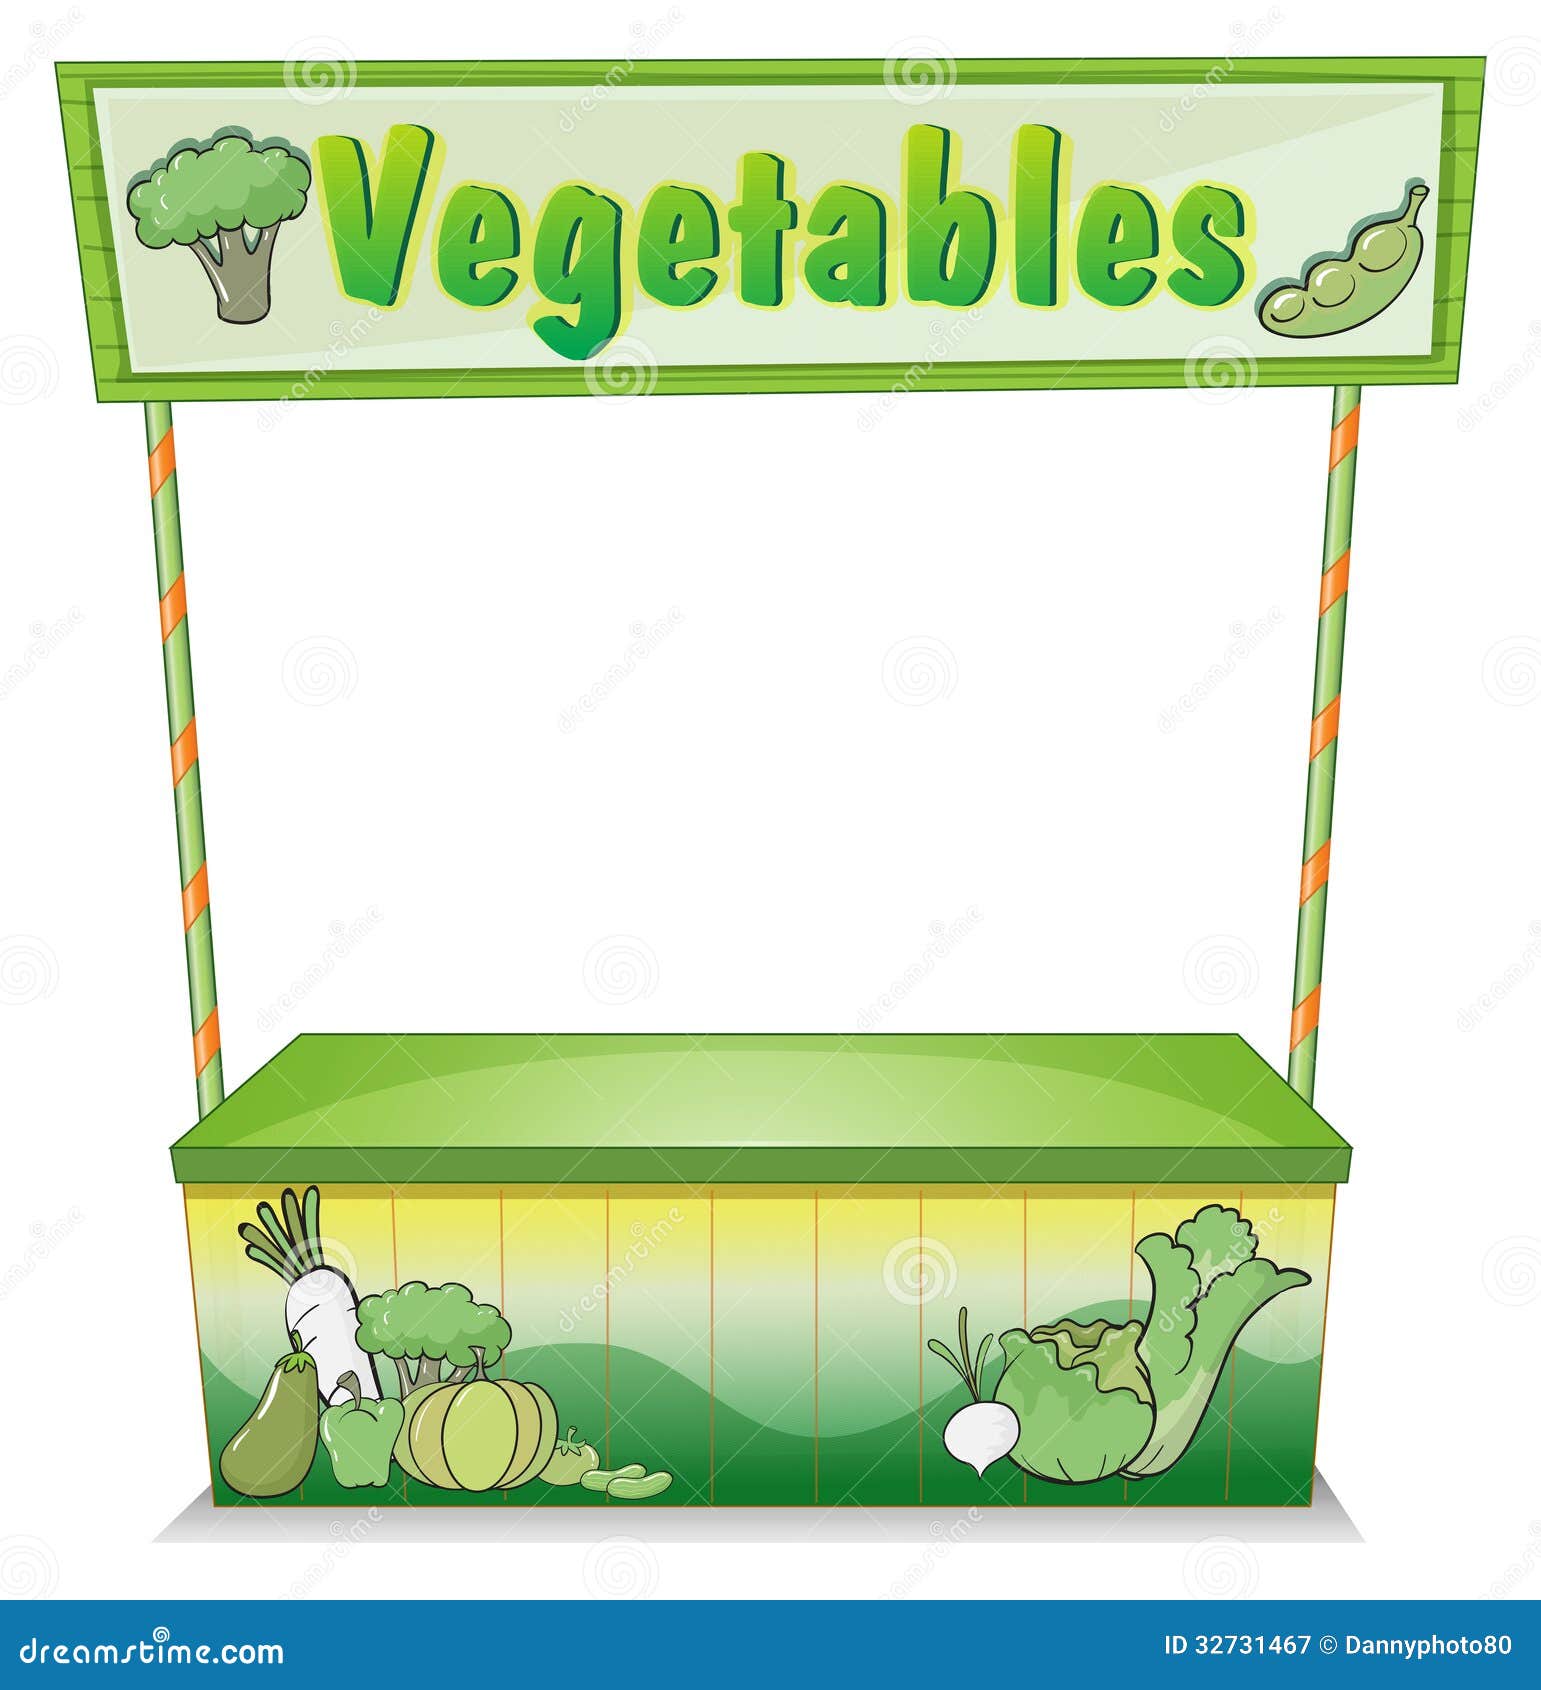 Vegetable Stall Royalty Free Stock Photography - Image: 32731467